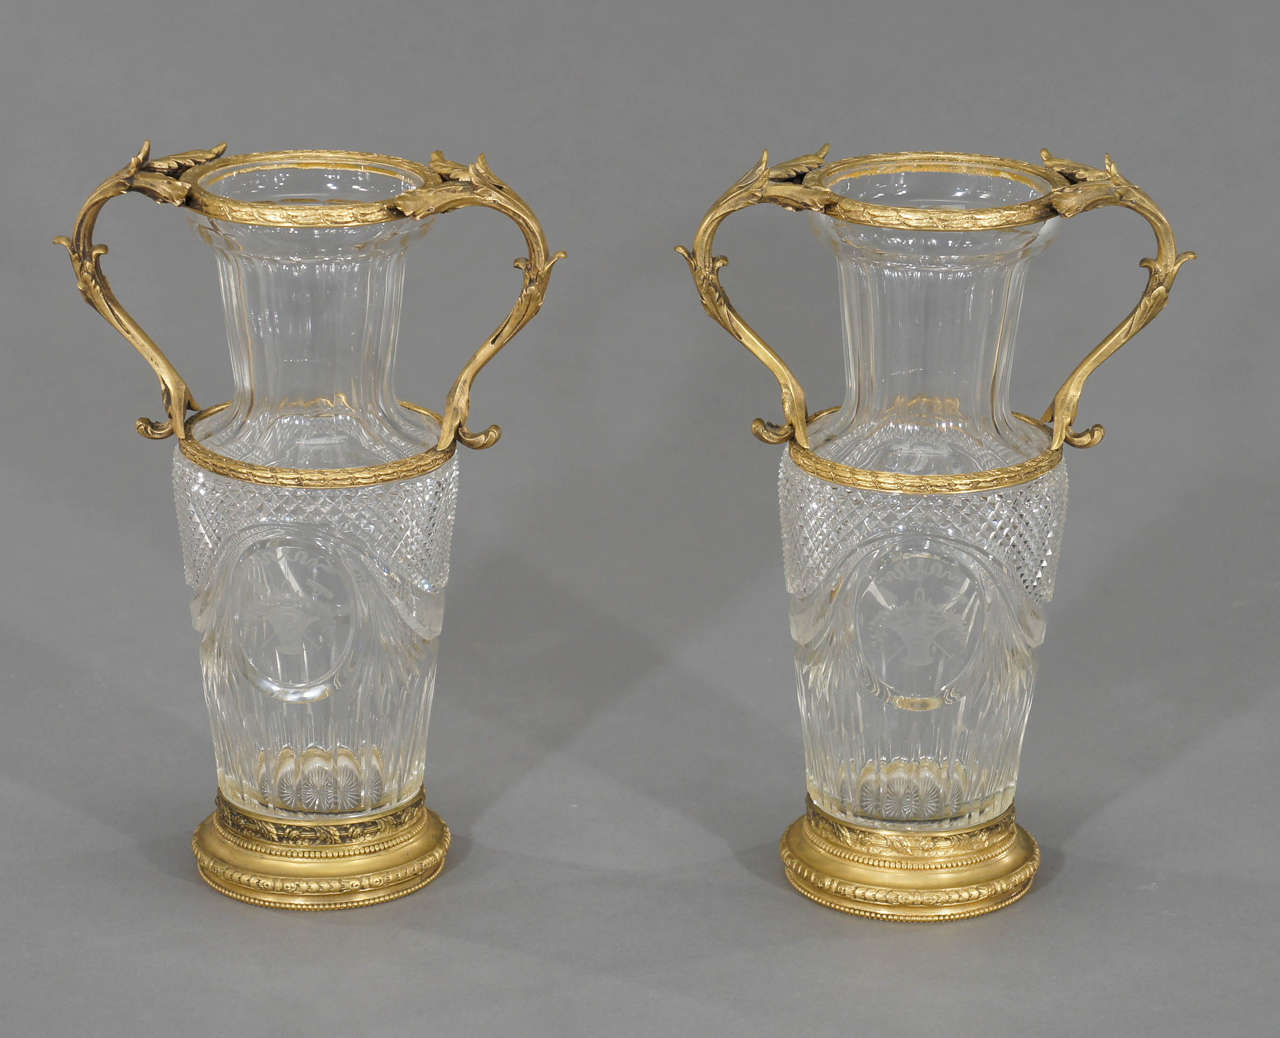 This is  a more unusual pair of Baccarat crystal vases in gorgeous vermeil bronze mounts. They are not the typical molded crystal, these are hand blown and finely cut with diamond point cutting and detailed copper wheel intaglio engraving, depicting